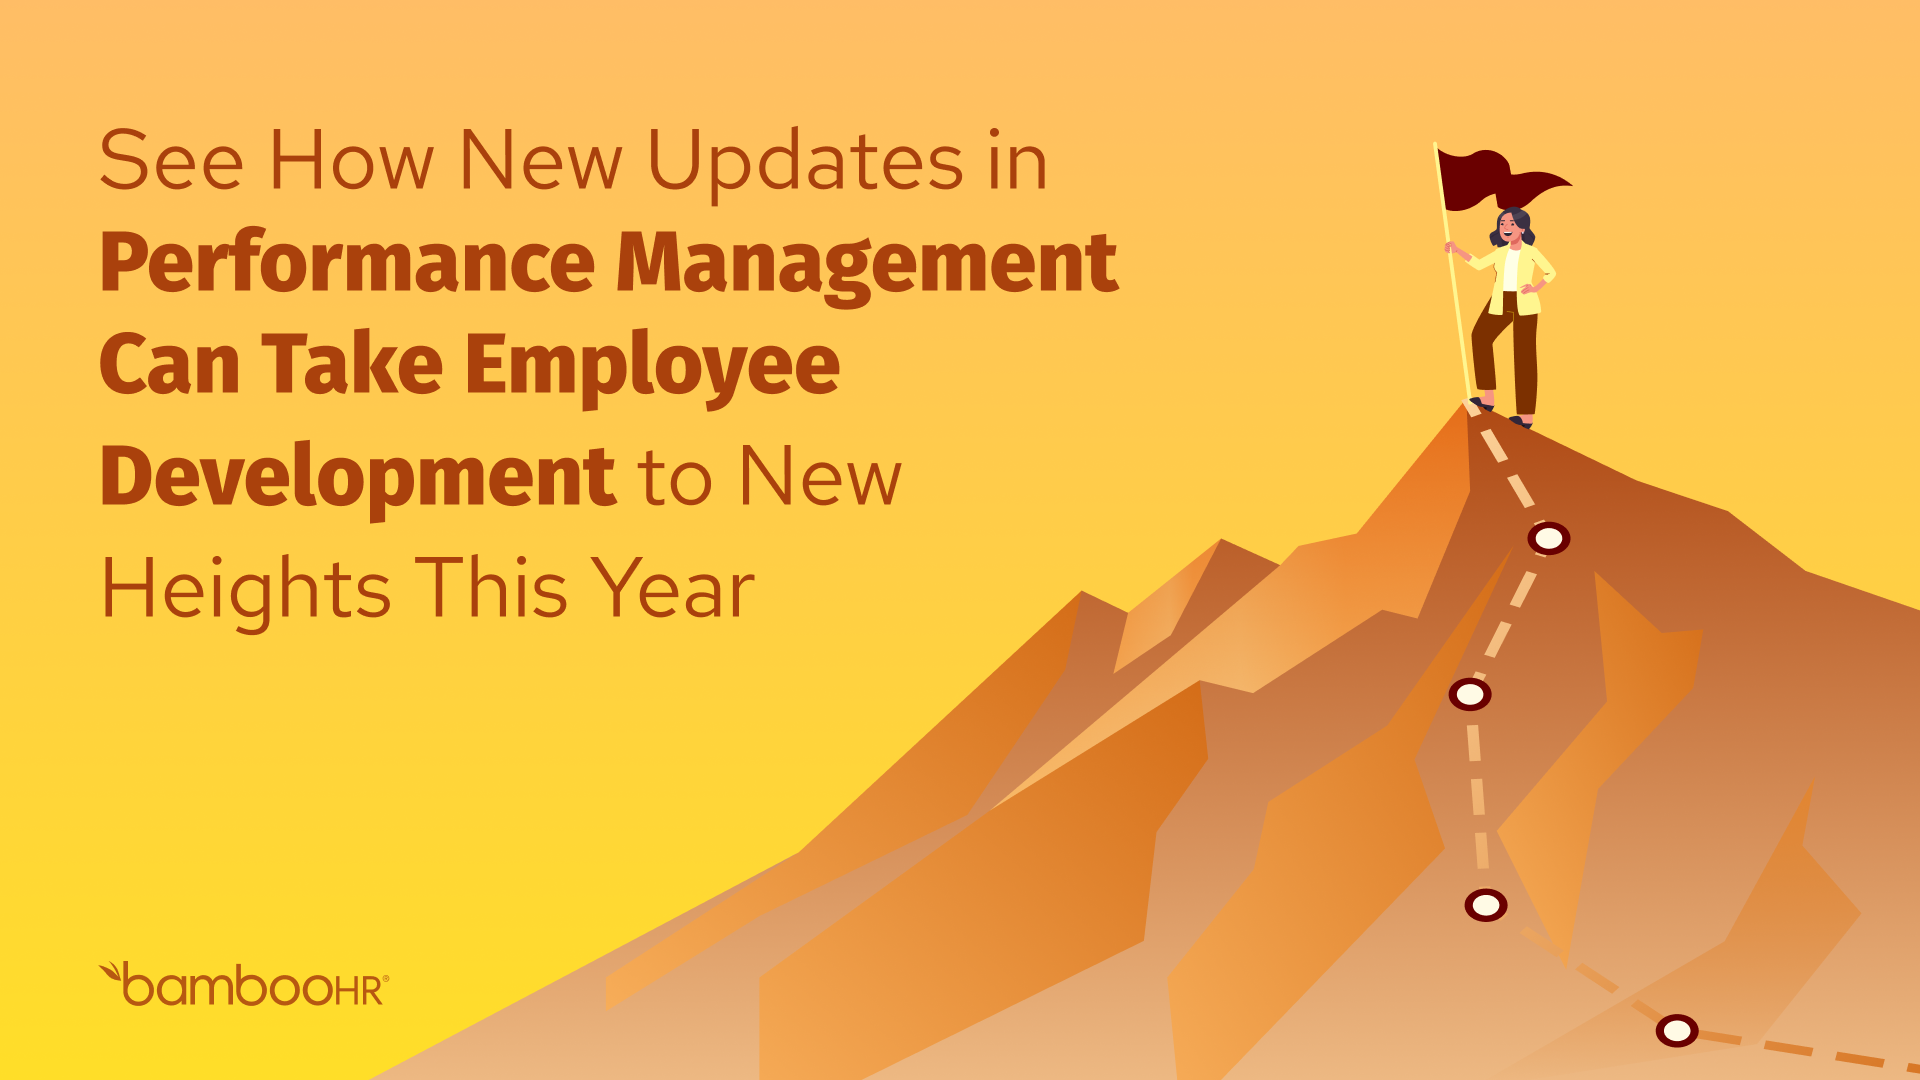 See How New Updates in Performance Management Can Take Employee Development to New Heights This Year